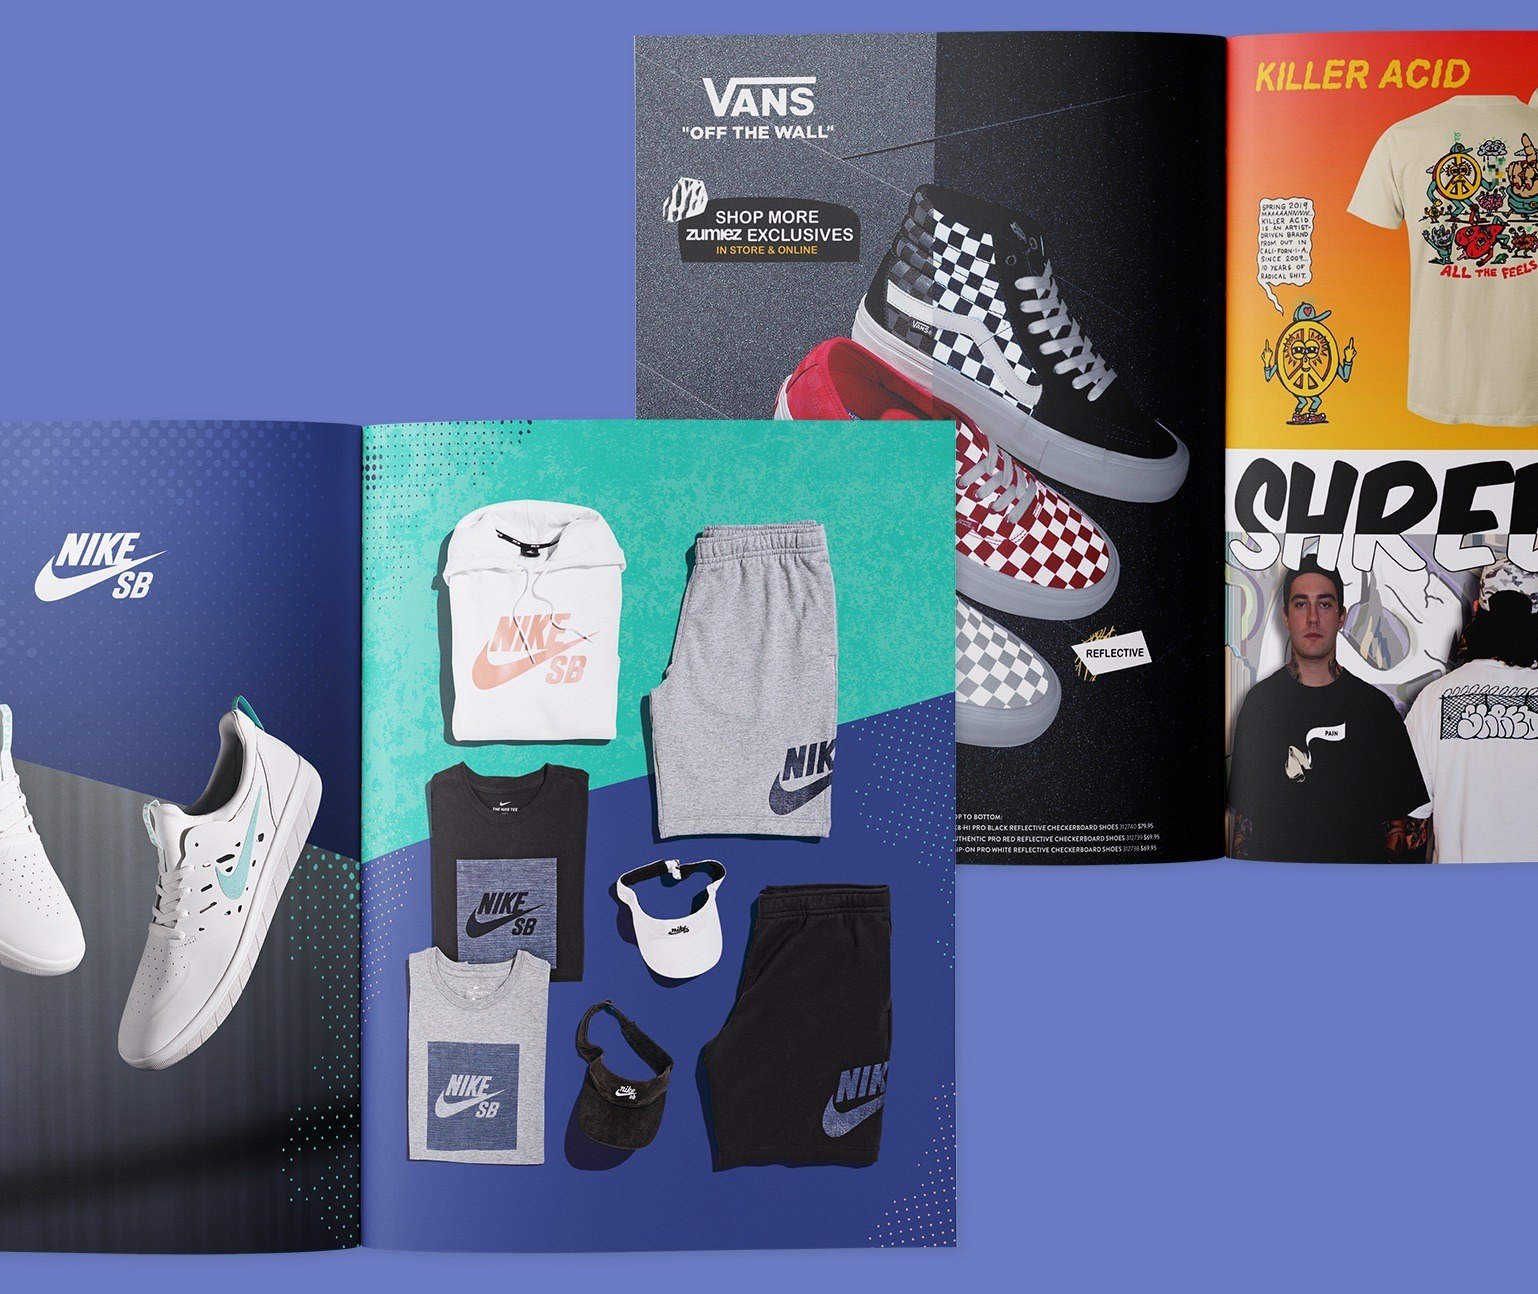 Two catalog spreads on a blue background; one Nike SB shoes and clothing, one Vans skate shoes